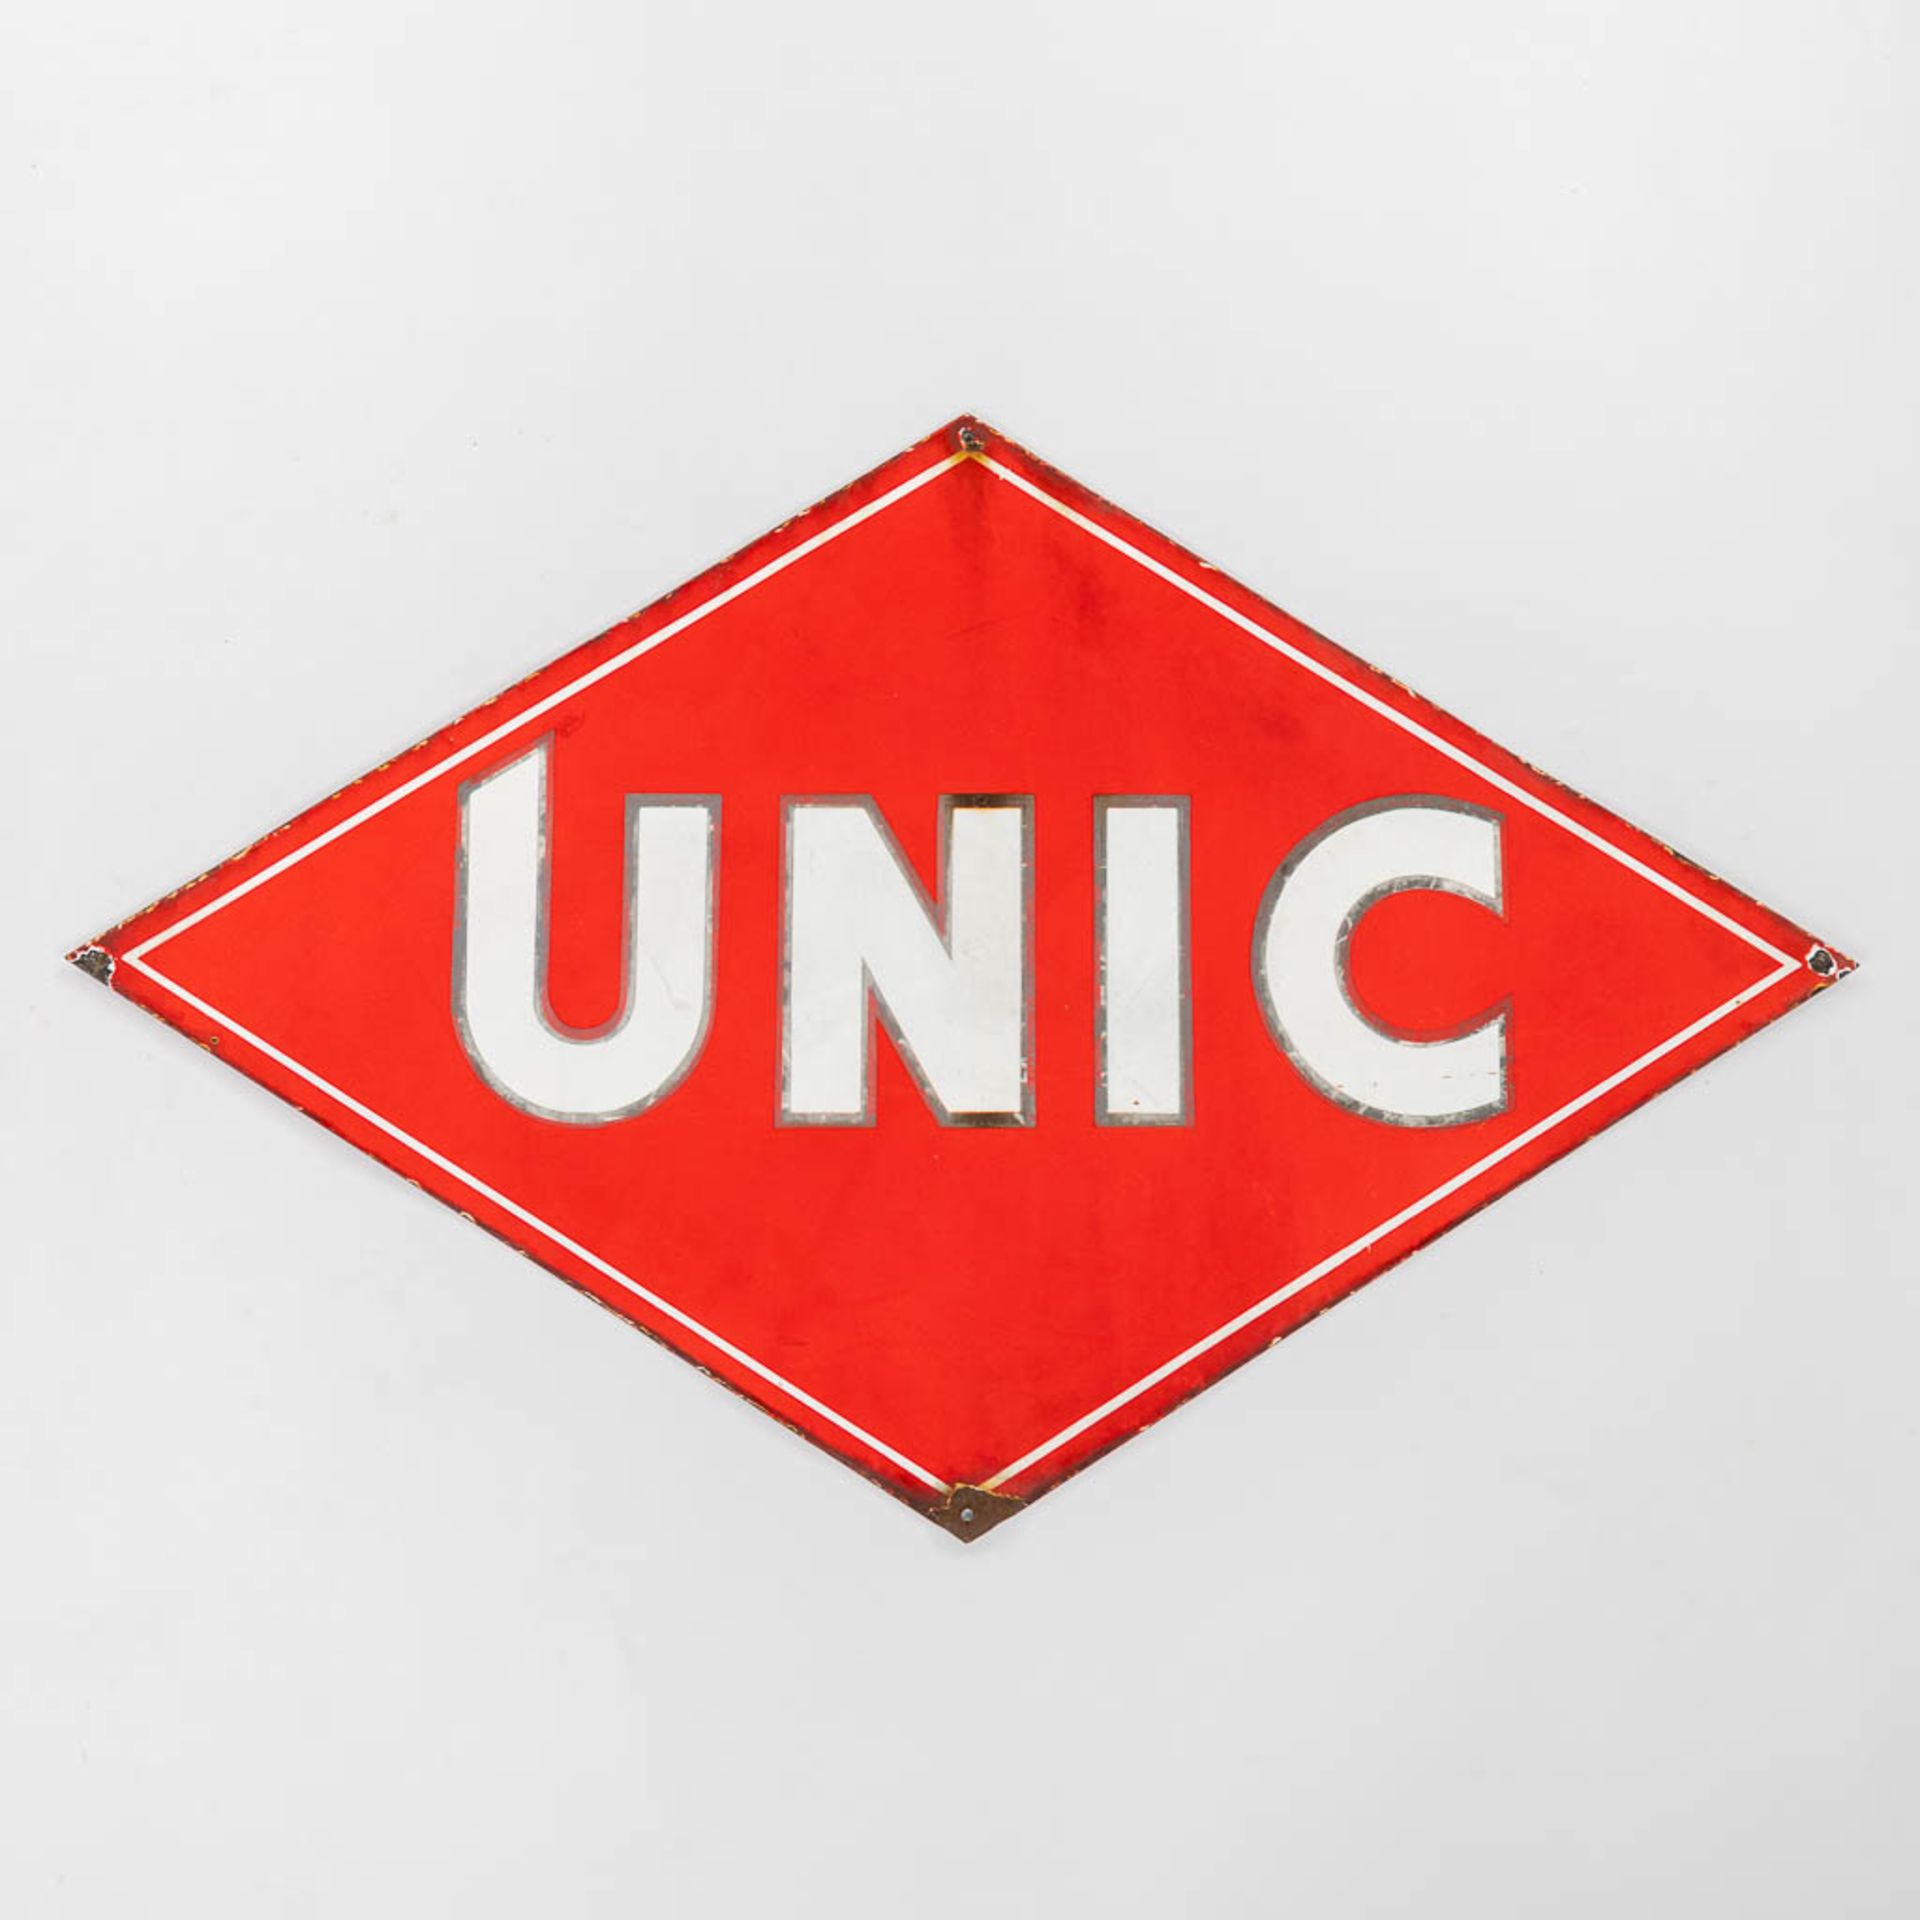 Unic, a double-faced enamelled plate. (W: 120 x H: 76 cm)